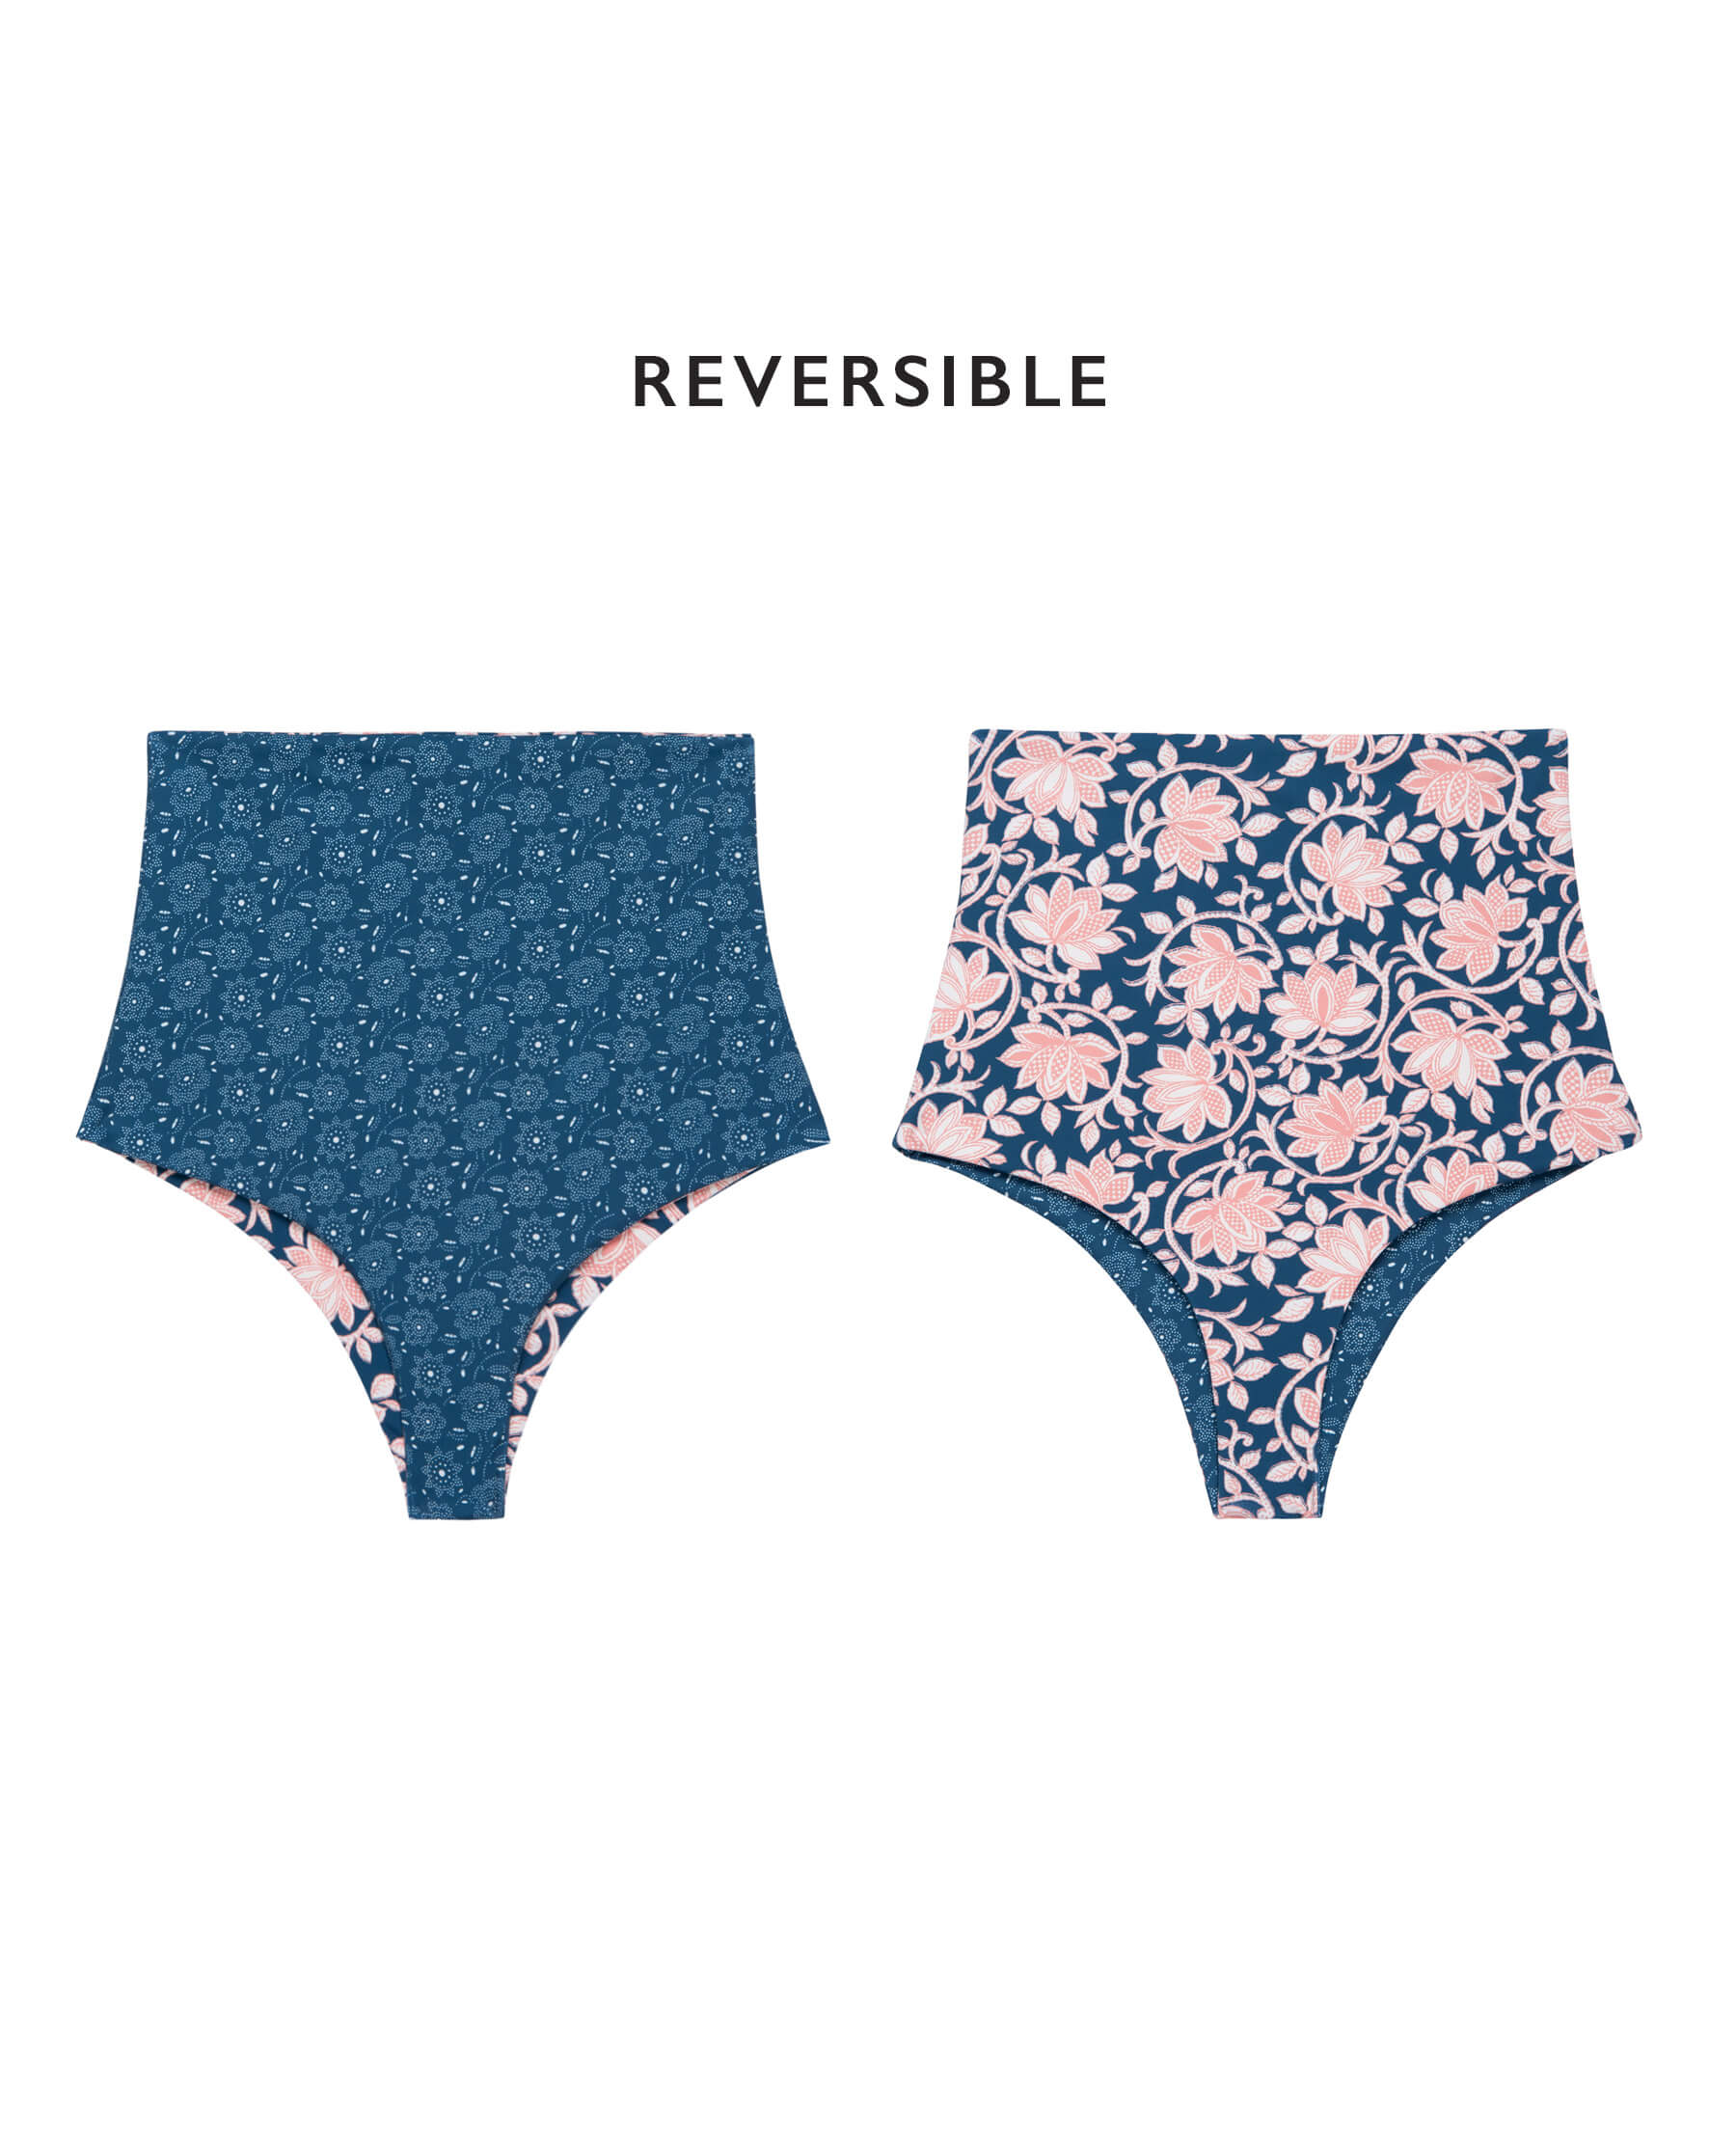 The Reversible High-Rise Brief. -- Bay Oasis Floral and Bay Bandana Daisy SWIM BOTTOMS THE GREAT. SP24 SWIM